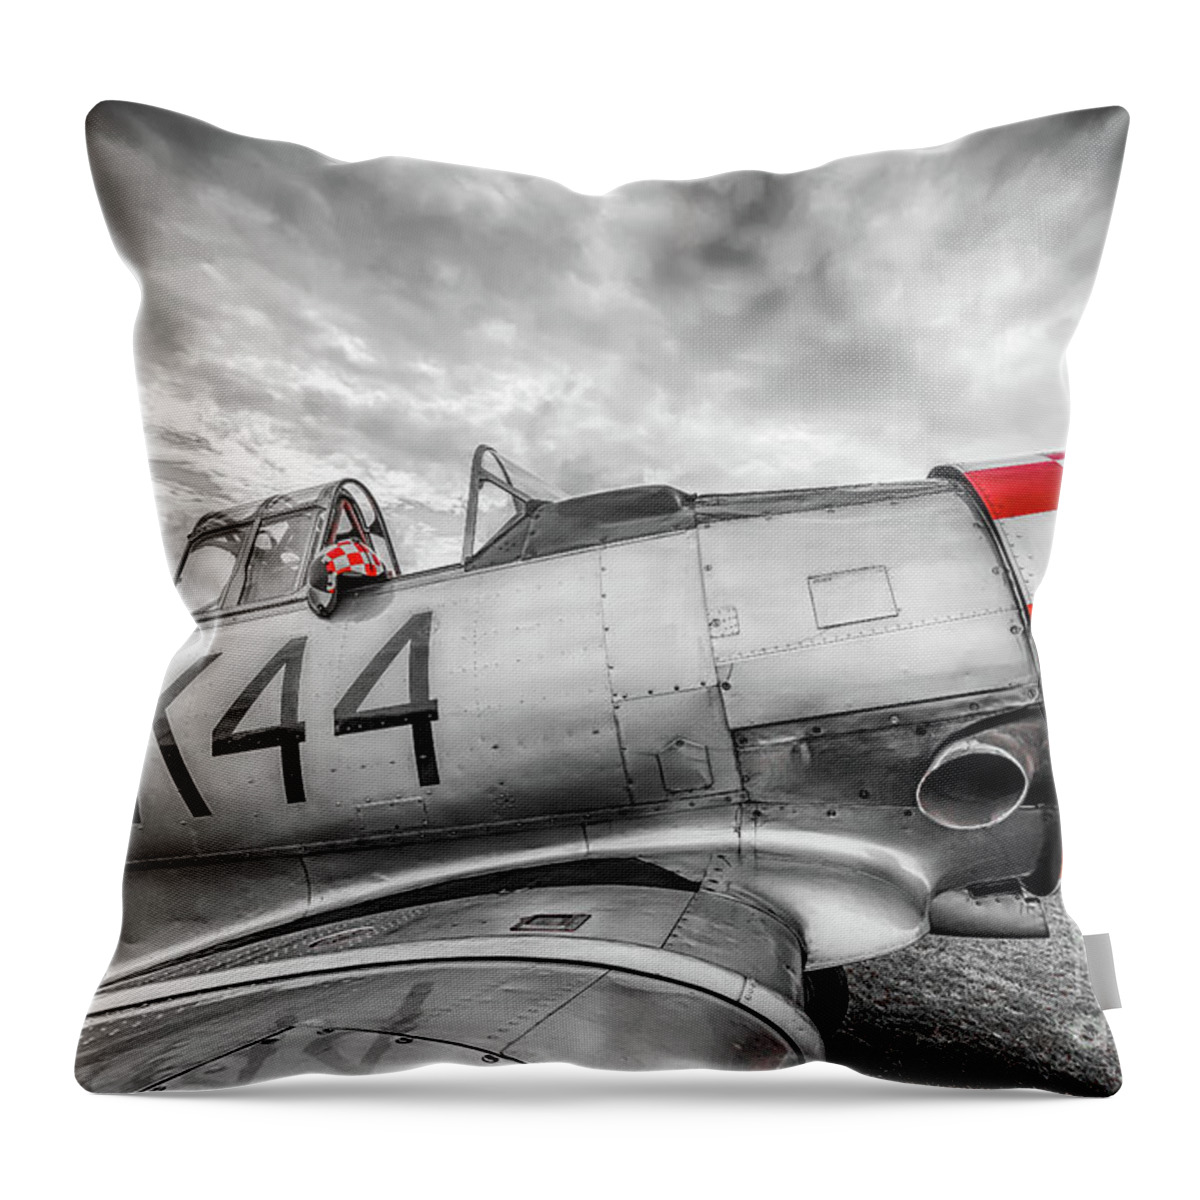 North American Throw Pillow featuring the photograph Red Checkers by Paul Quinn